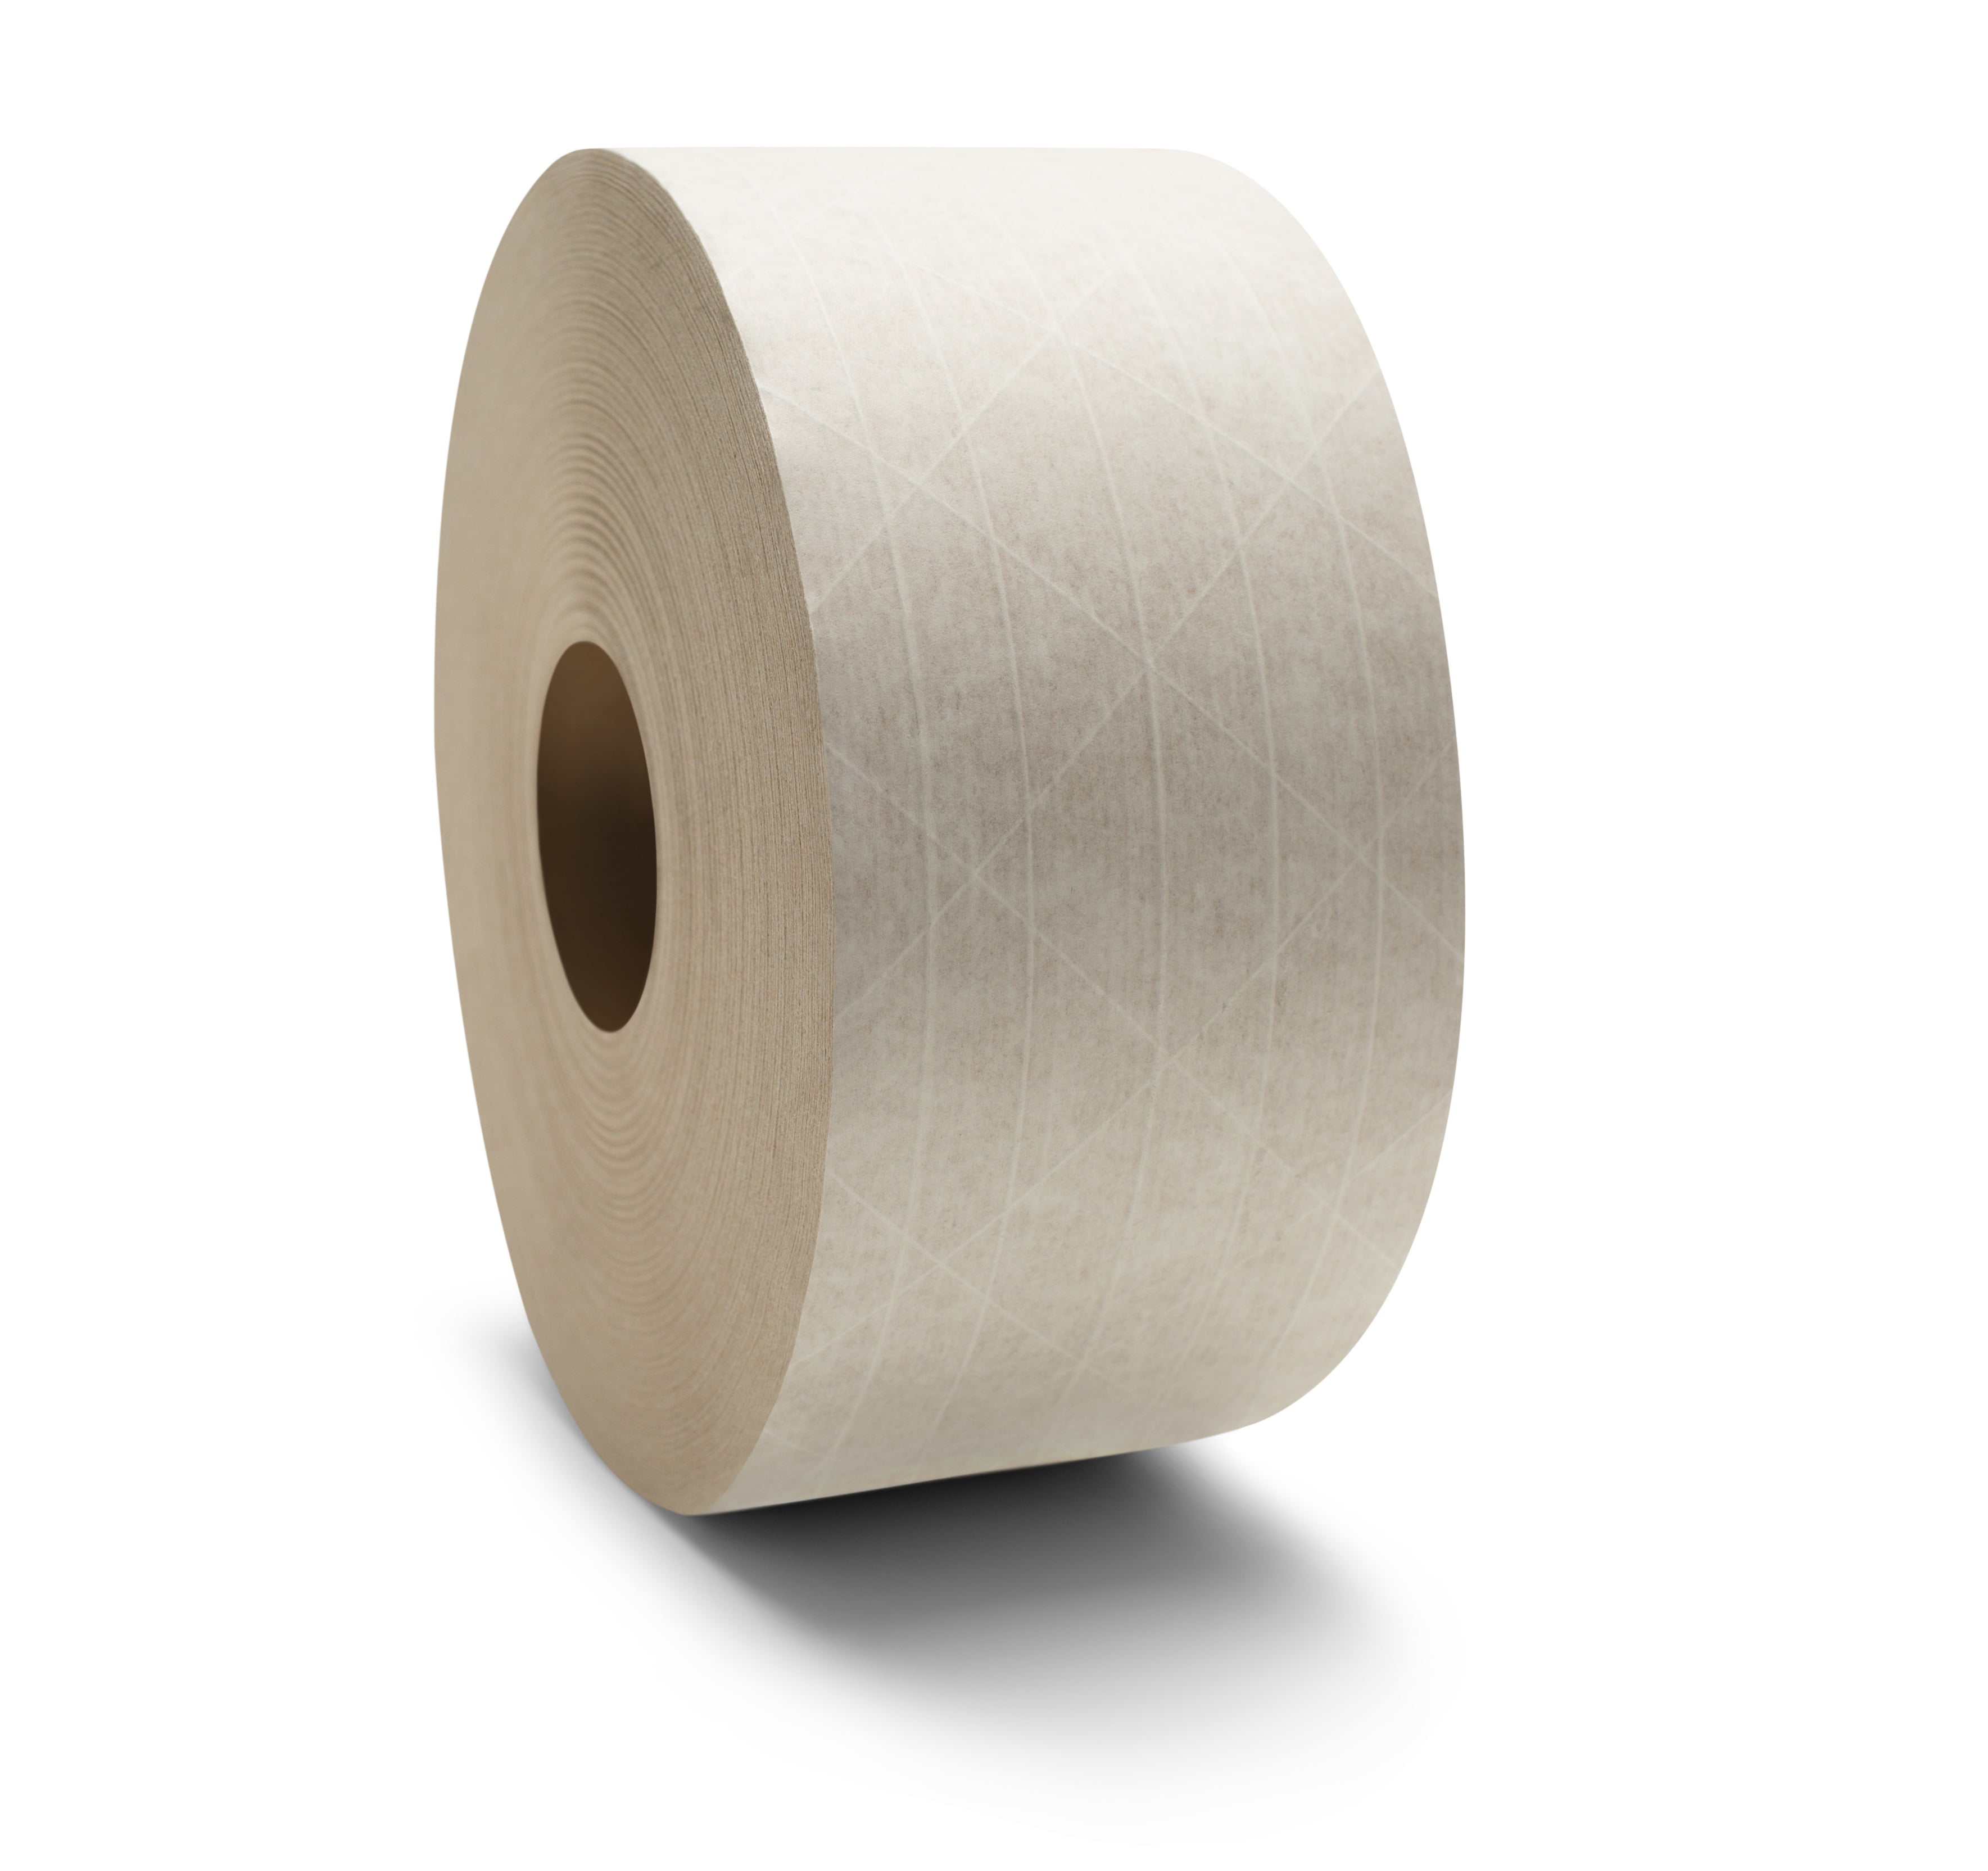 1 Roll Central Brand Packer's Pride Reinforced Tape 